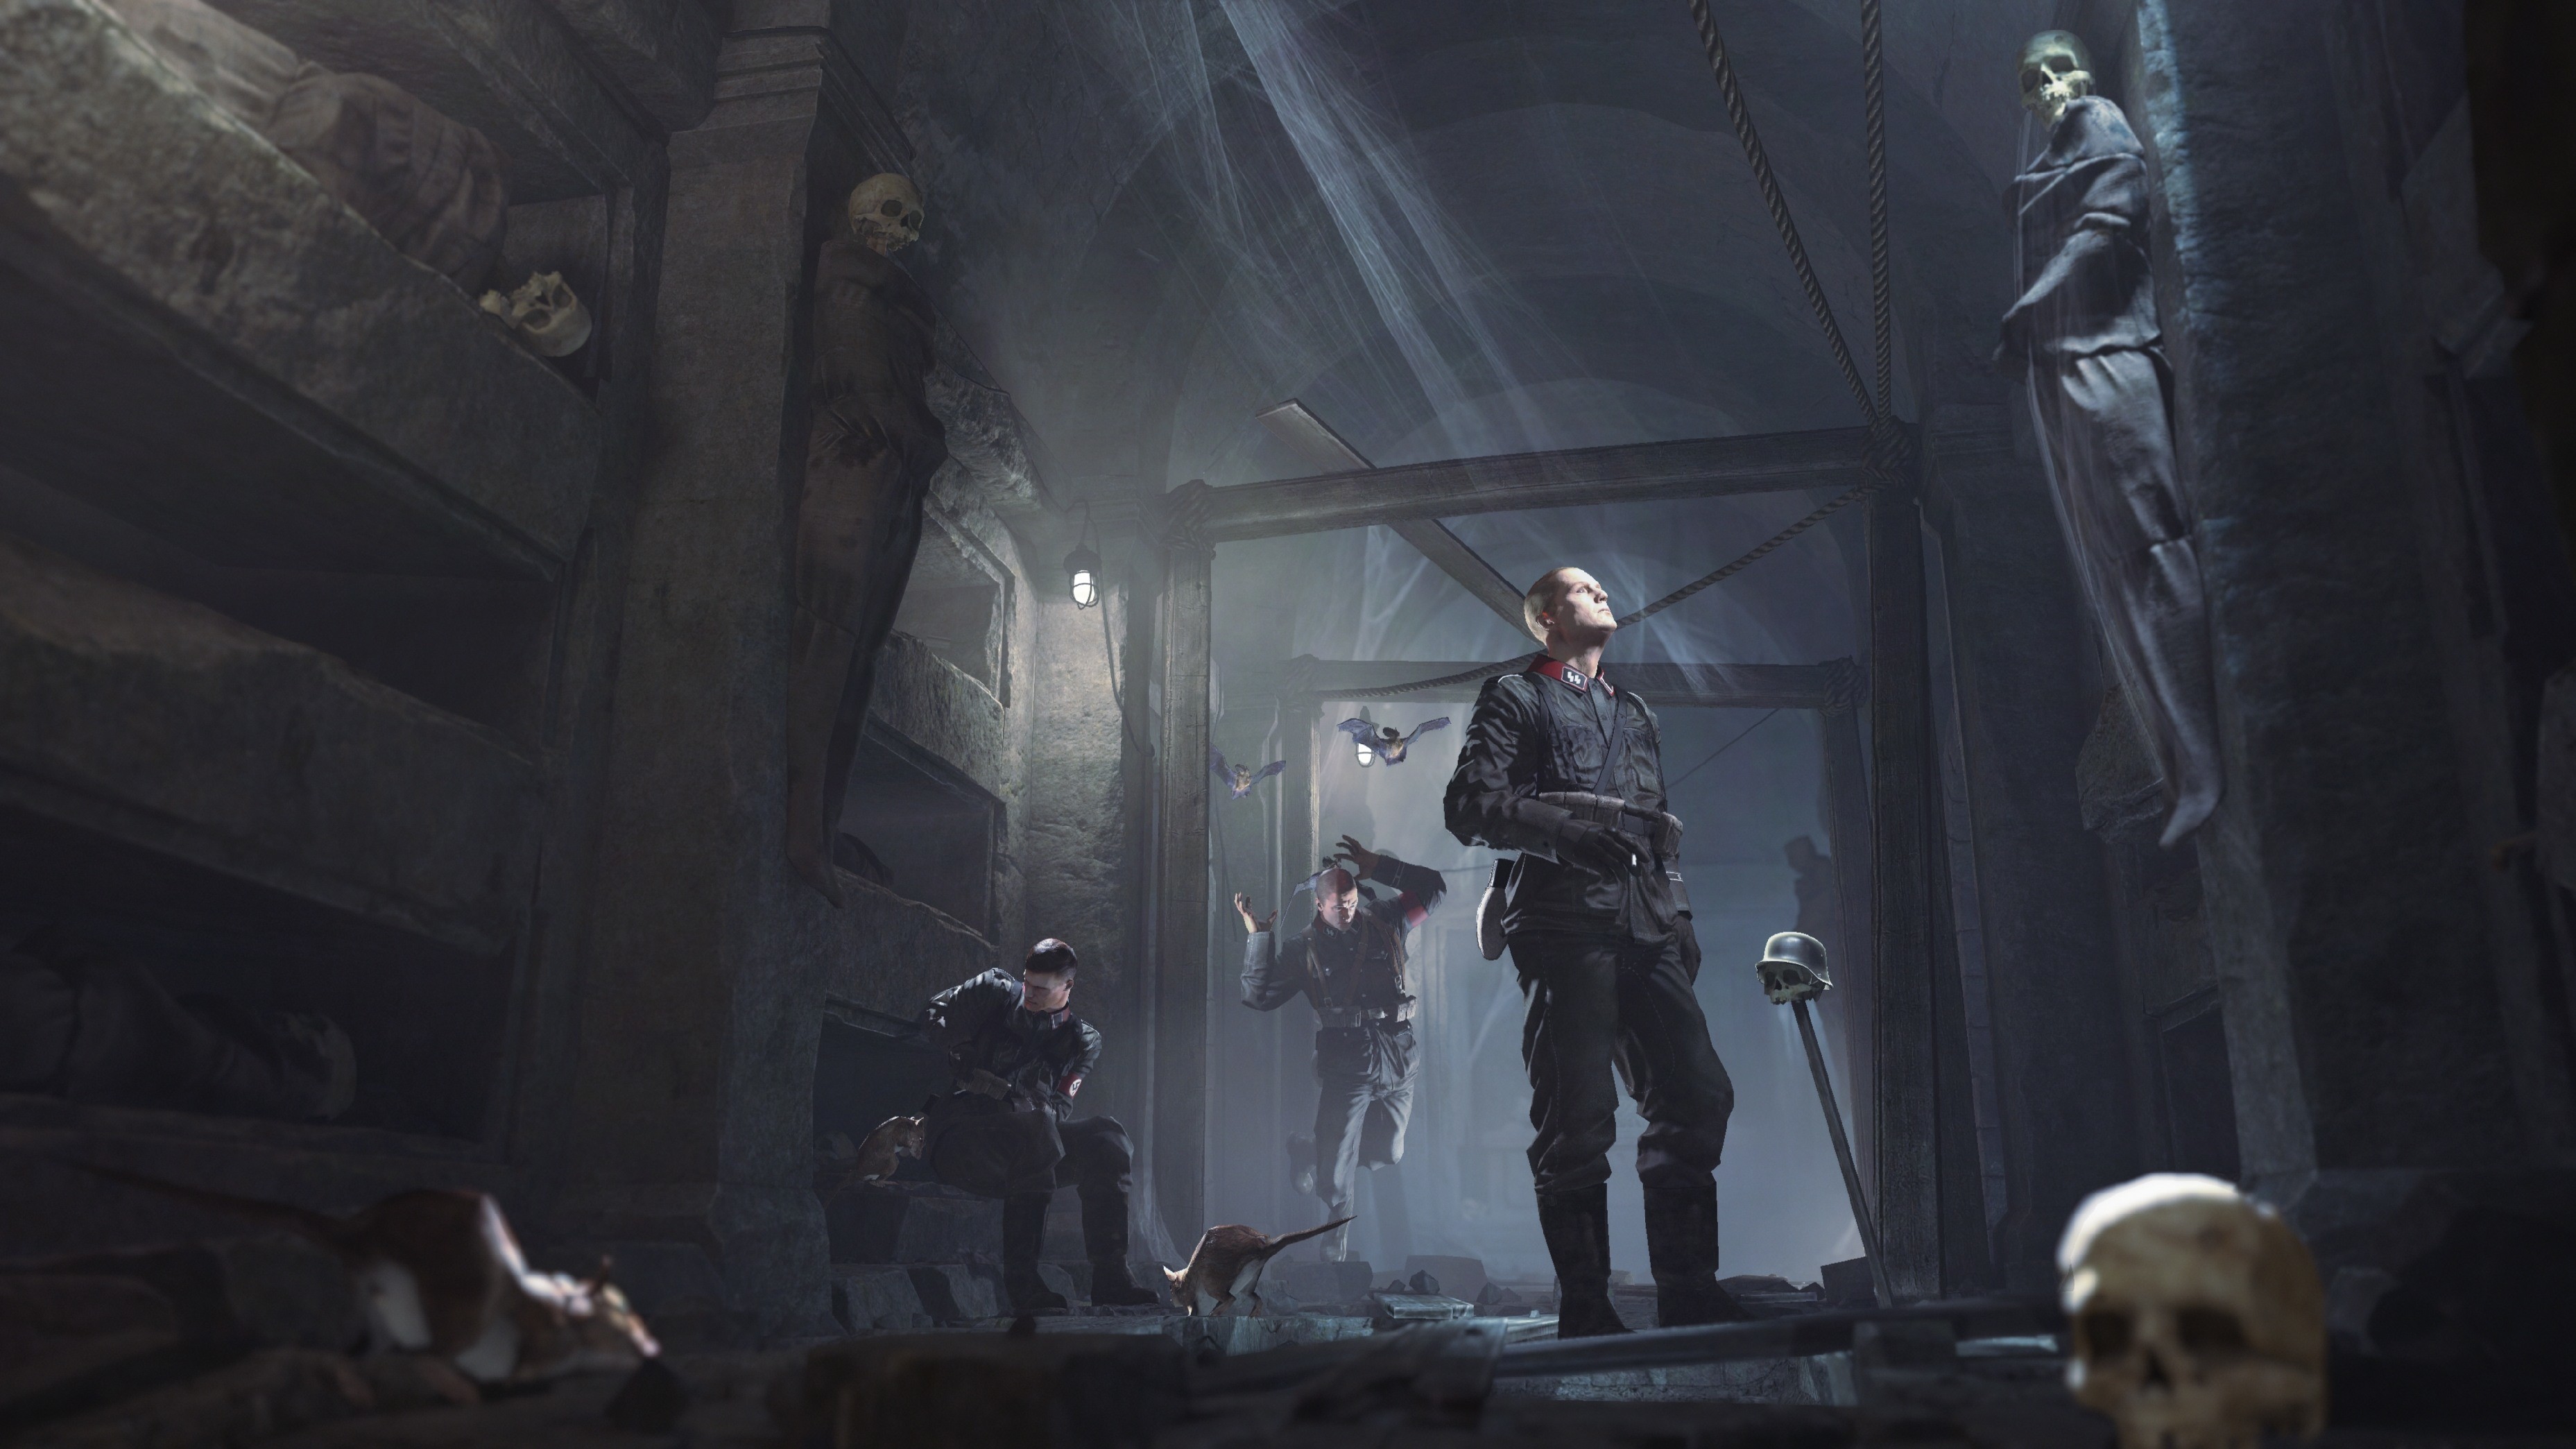 3714x2089 Wolfenstein: The Old Blood Screenshots, Pictures, Wallpapers - PC - IGN